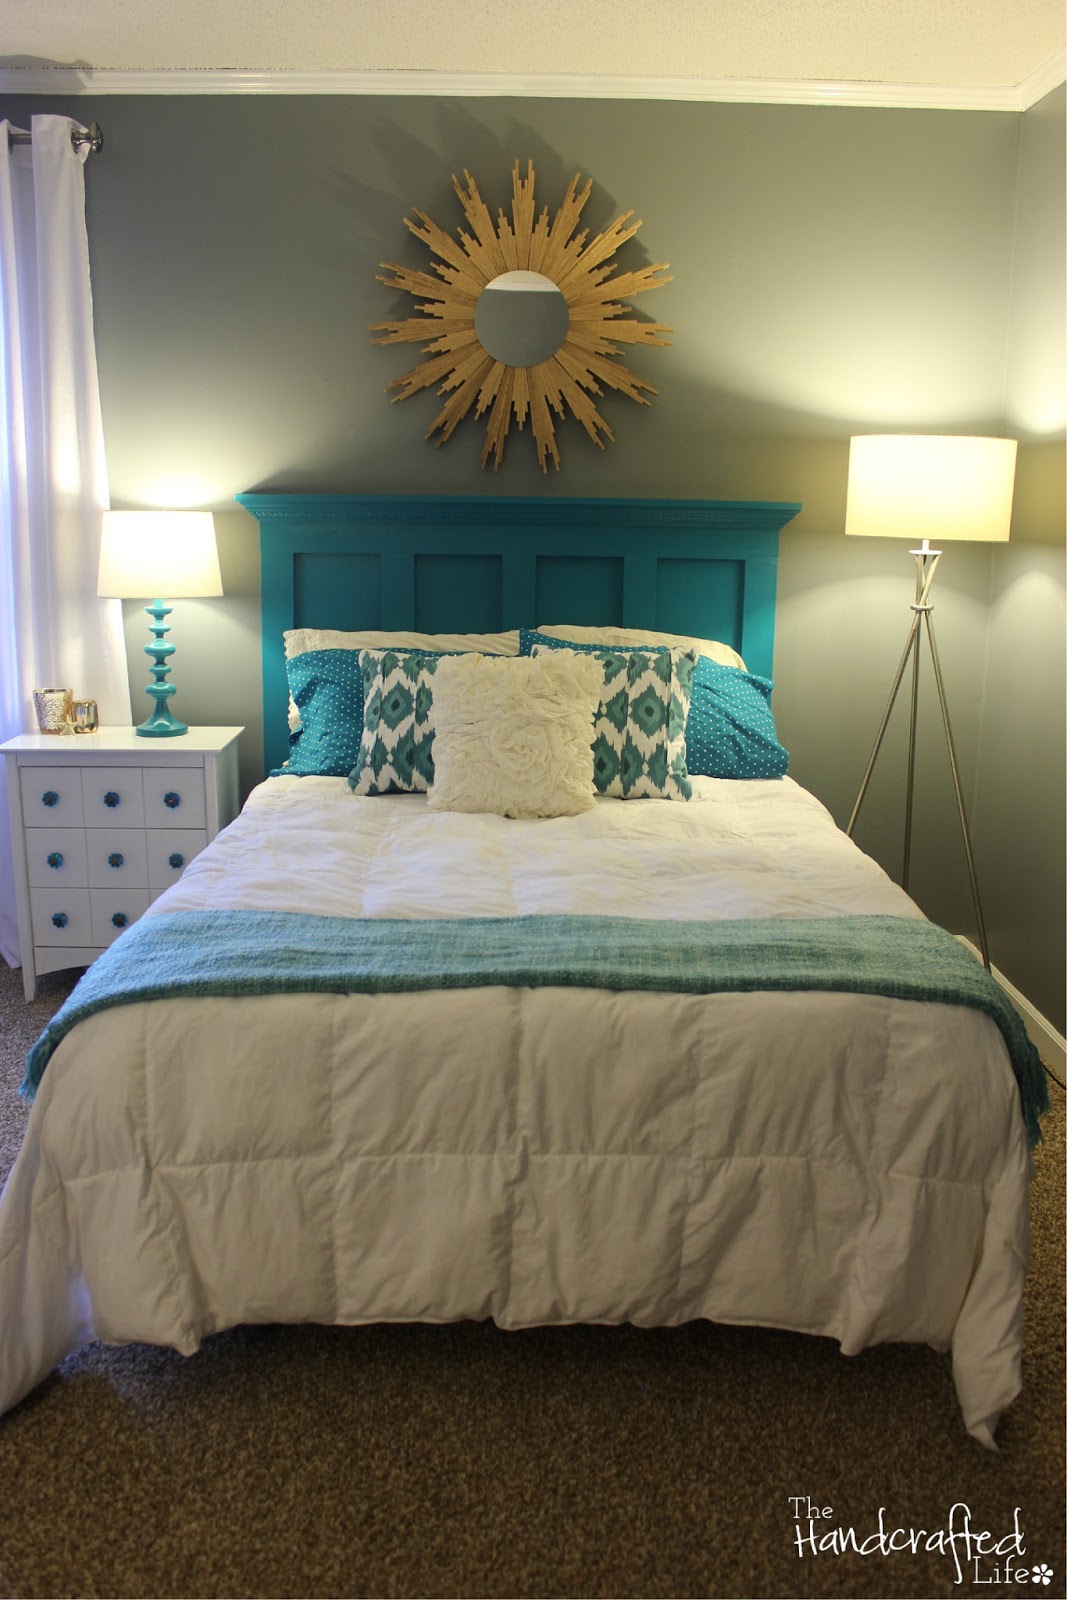  The Handcrafted Life Teal  White and Grey  Guest Bedroom  